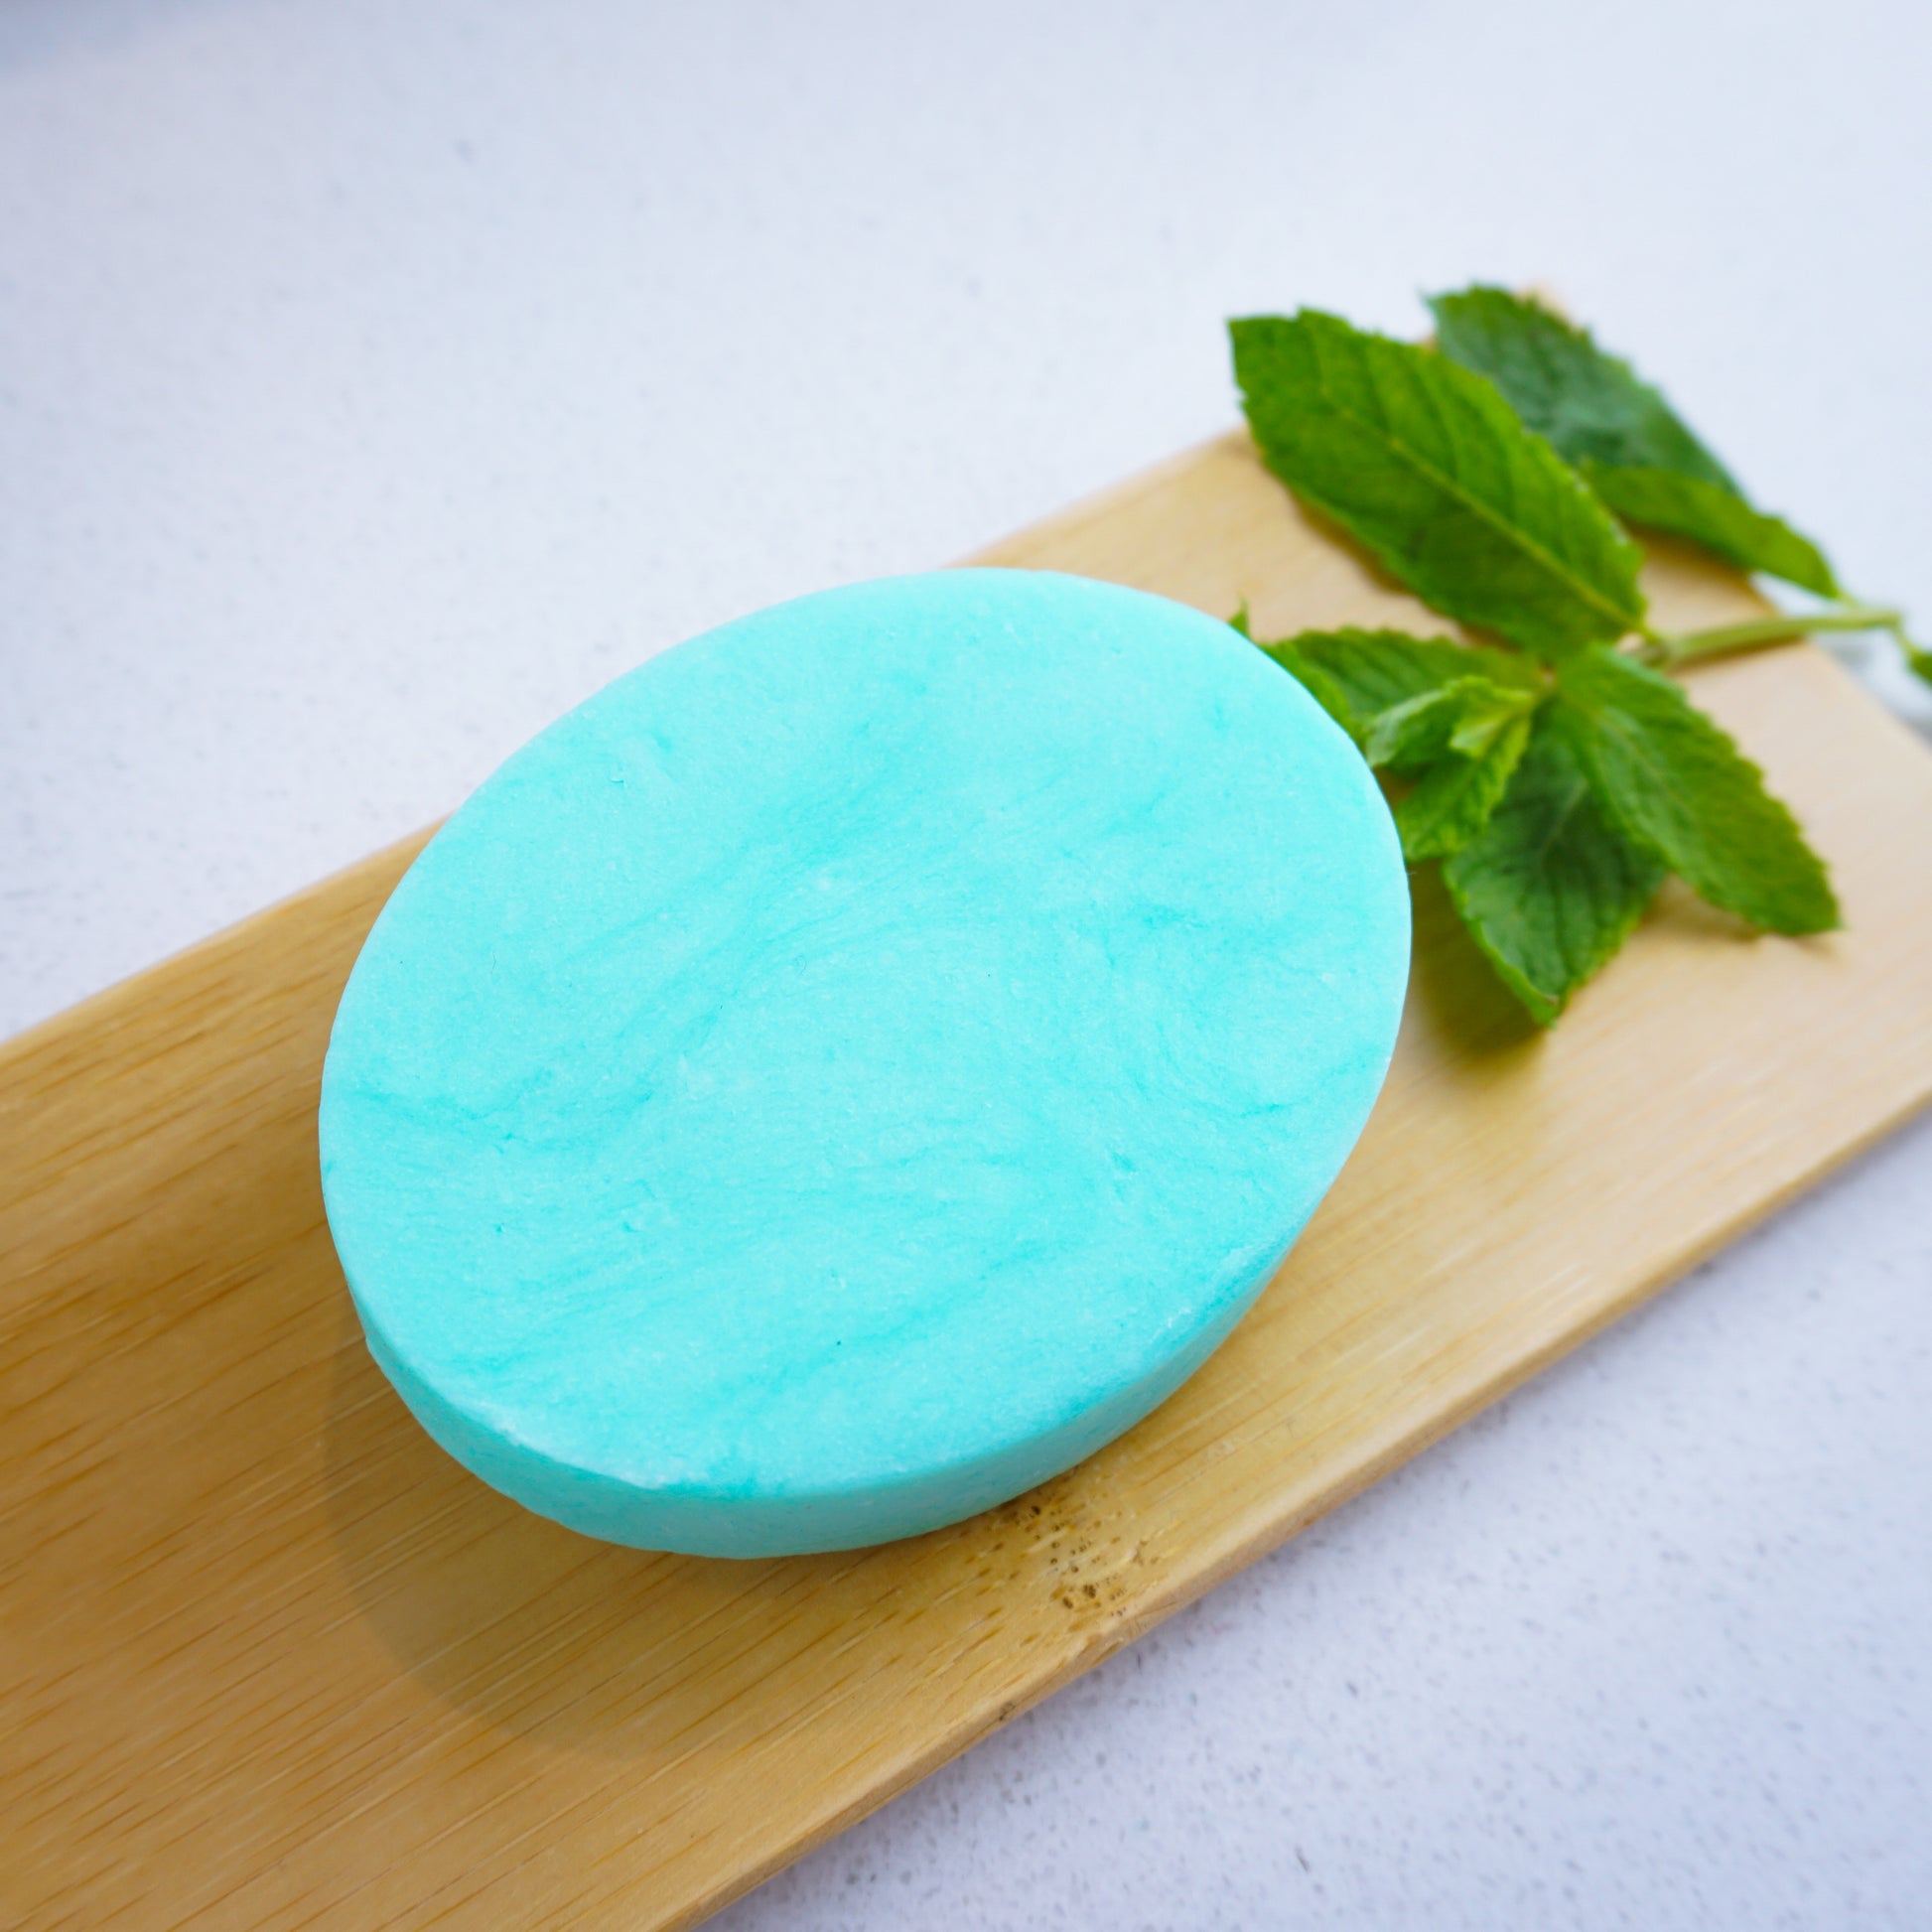 peppermint hydrating shampoo bar with mint leaves